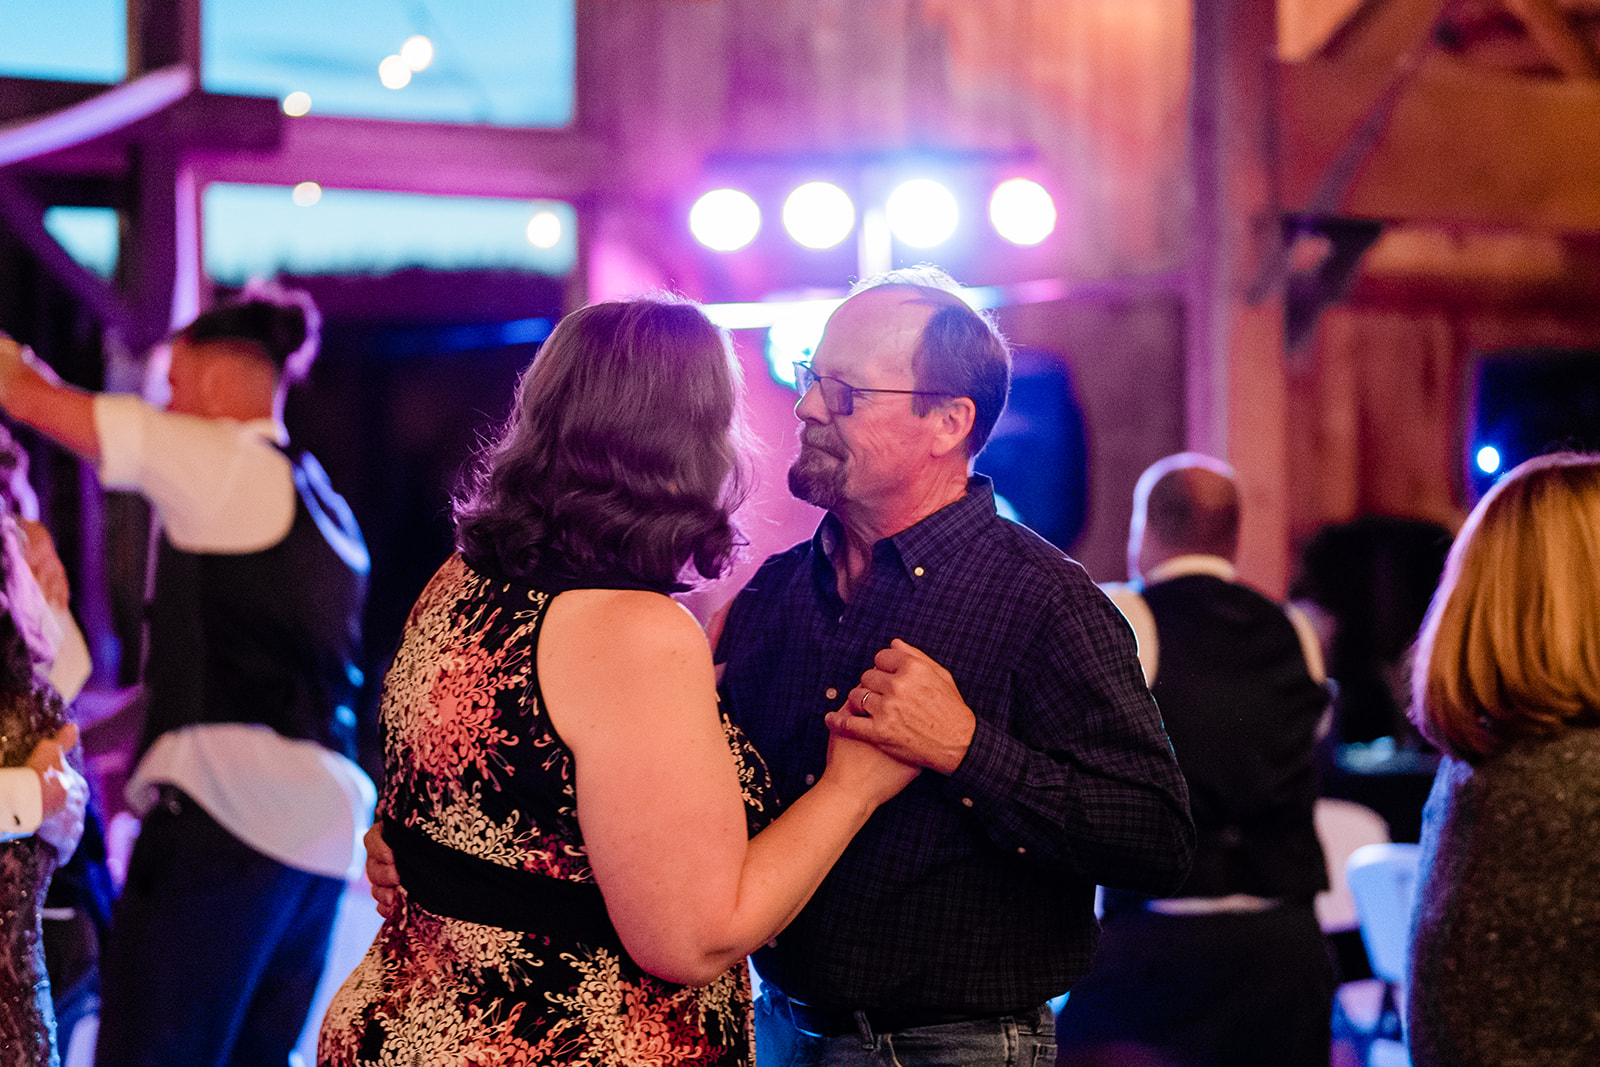 Husband and wife dancing at a Cattle Barn Wedding